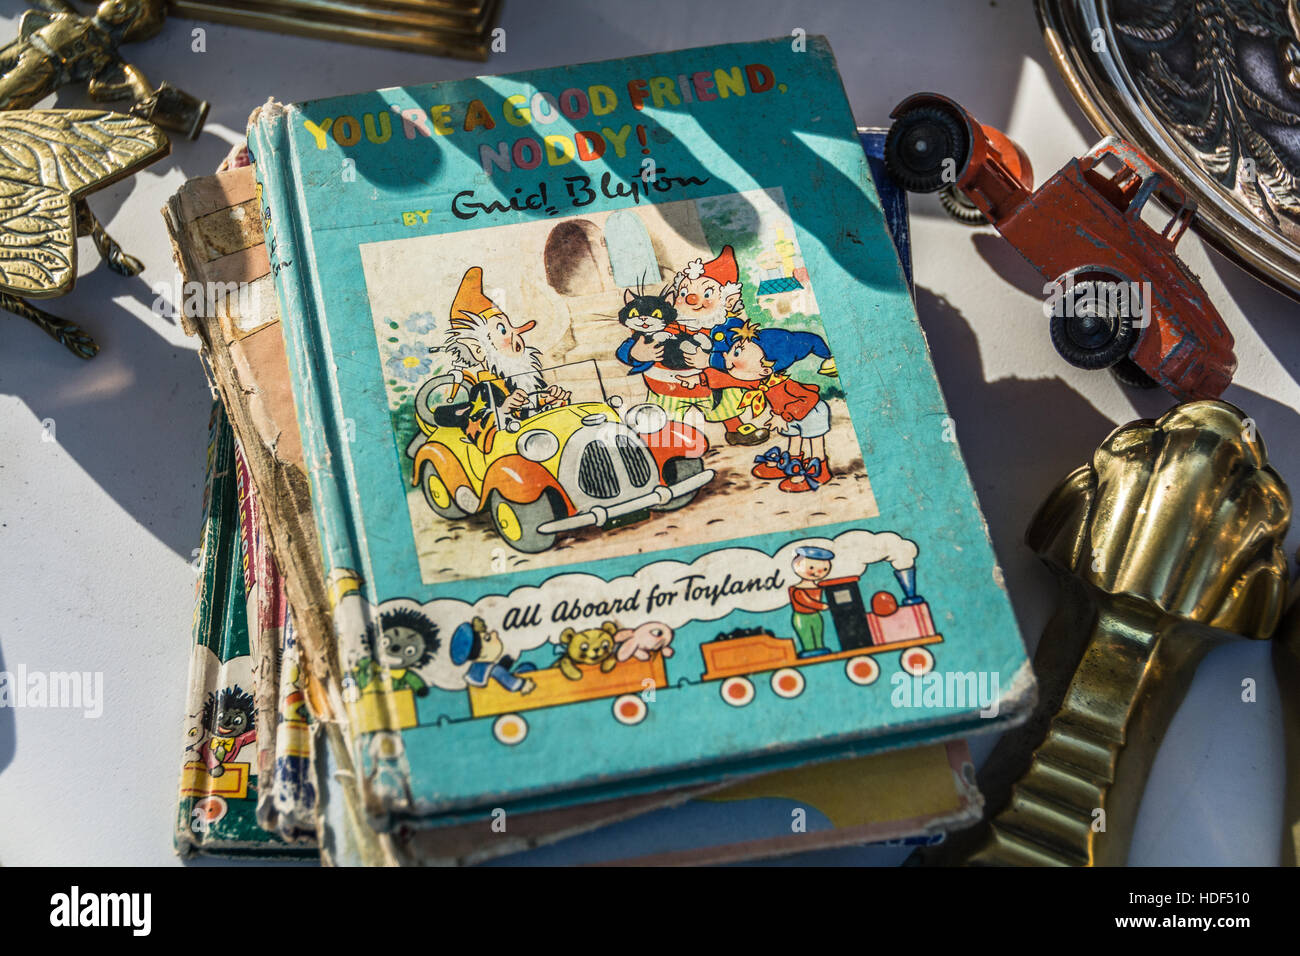 You're A Good Friend, Noddy! by Enid Blyton, on sale at a car boot sale in London, England, UK Stock Photo